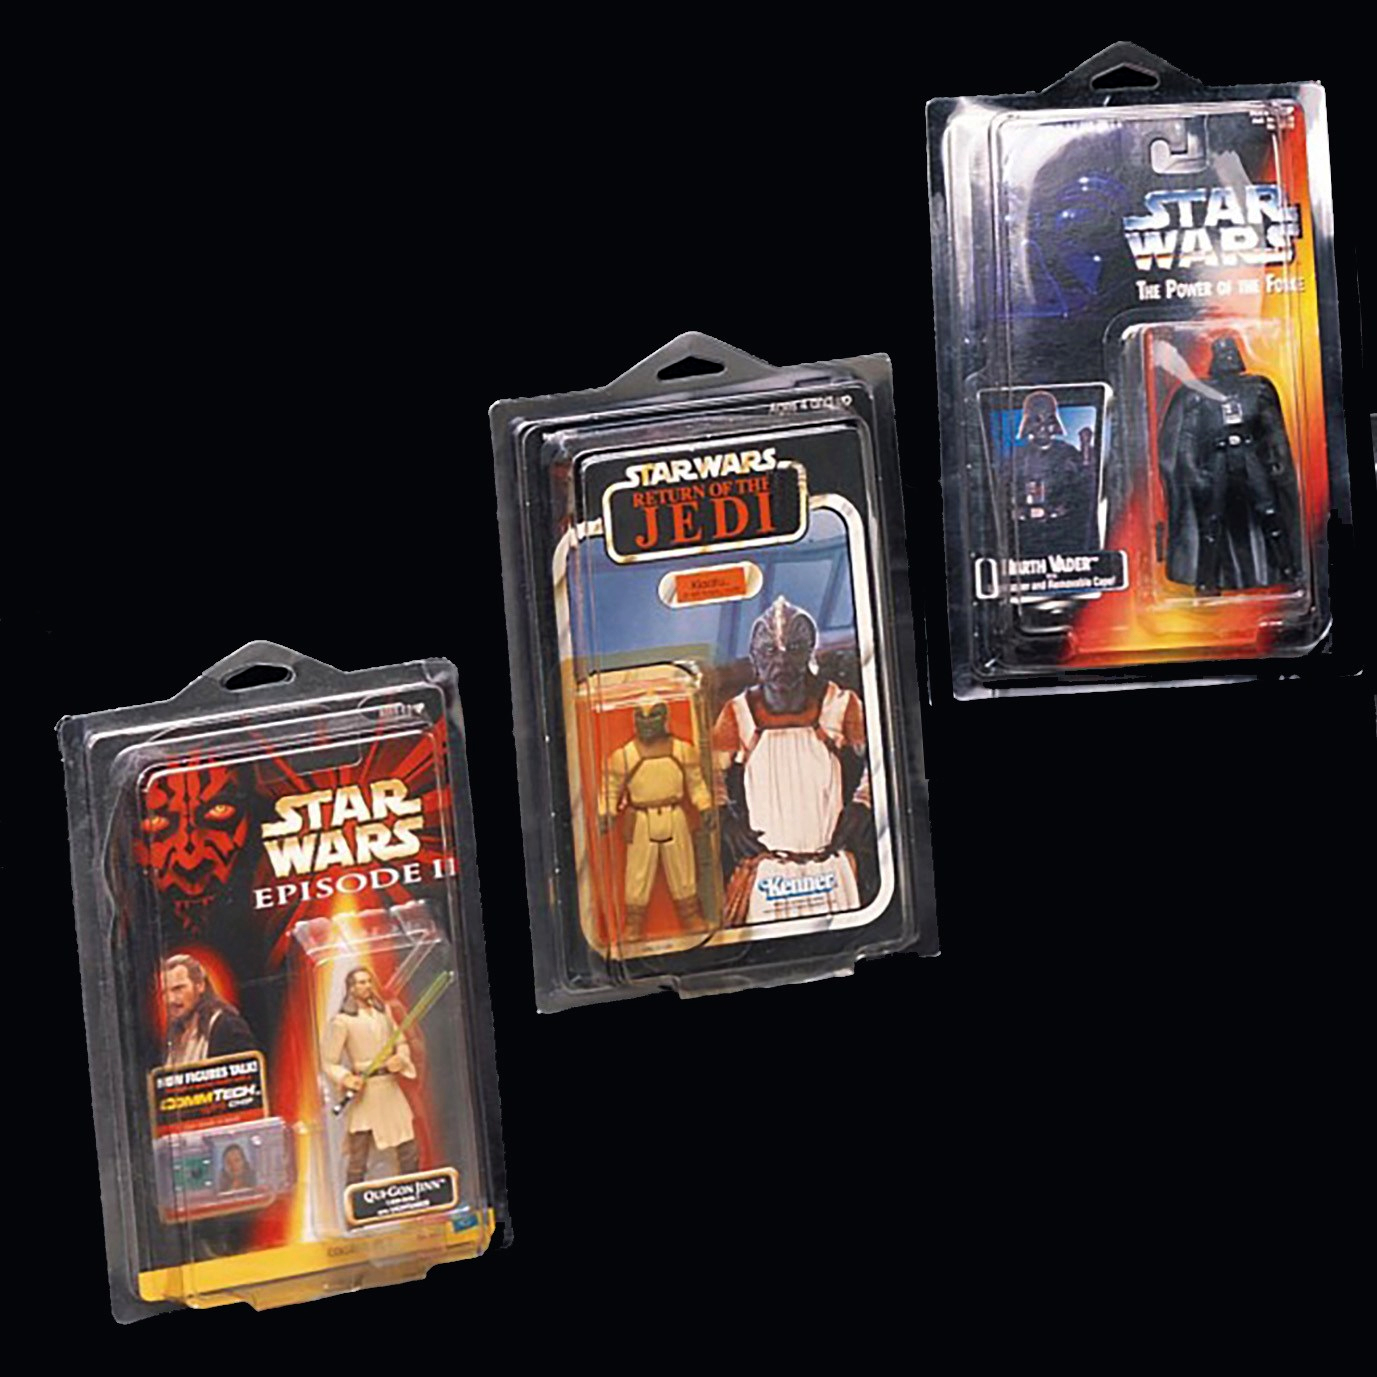 5.5x8.5x2 Protech STAR5 Star Case Storage/ Display for Star Wars Carded Figure 